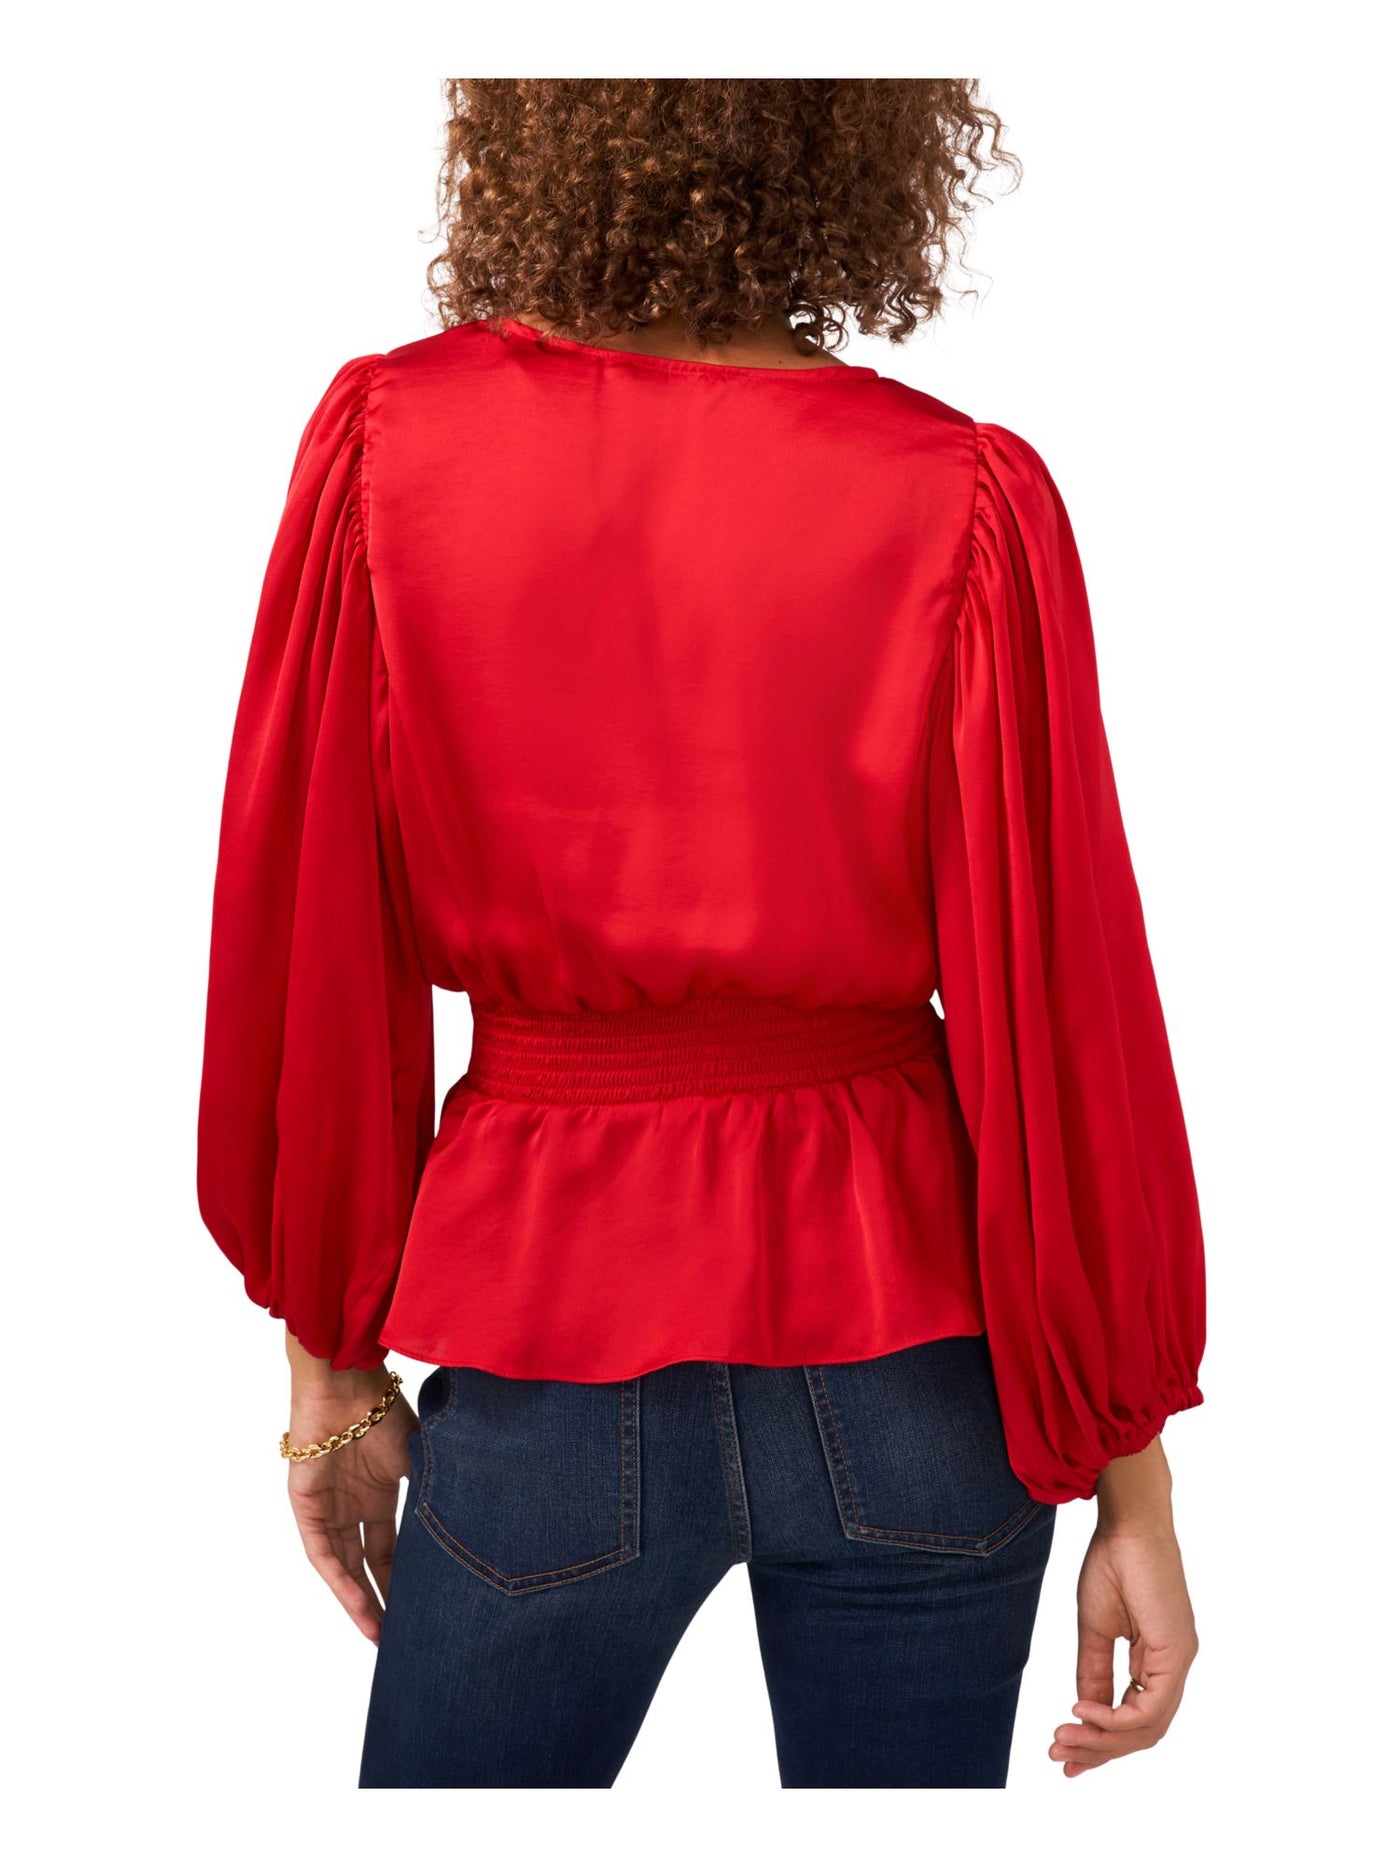 VINCE CAMUTO Womens Red Smocked Pleated Balloon Sleeve V Neck Wear To Work Peplum Top S